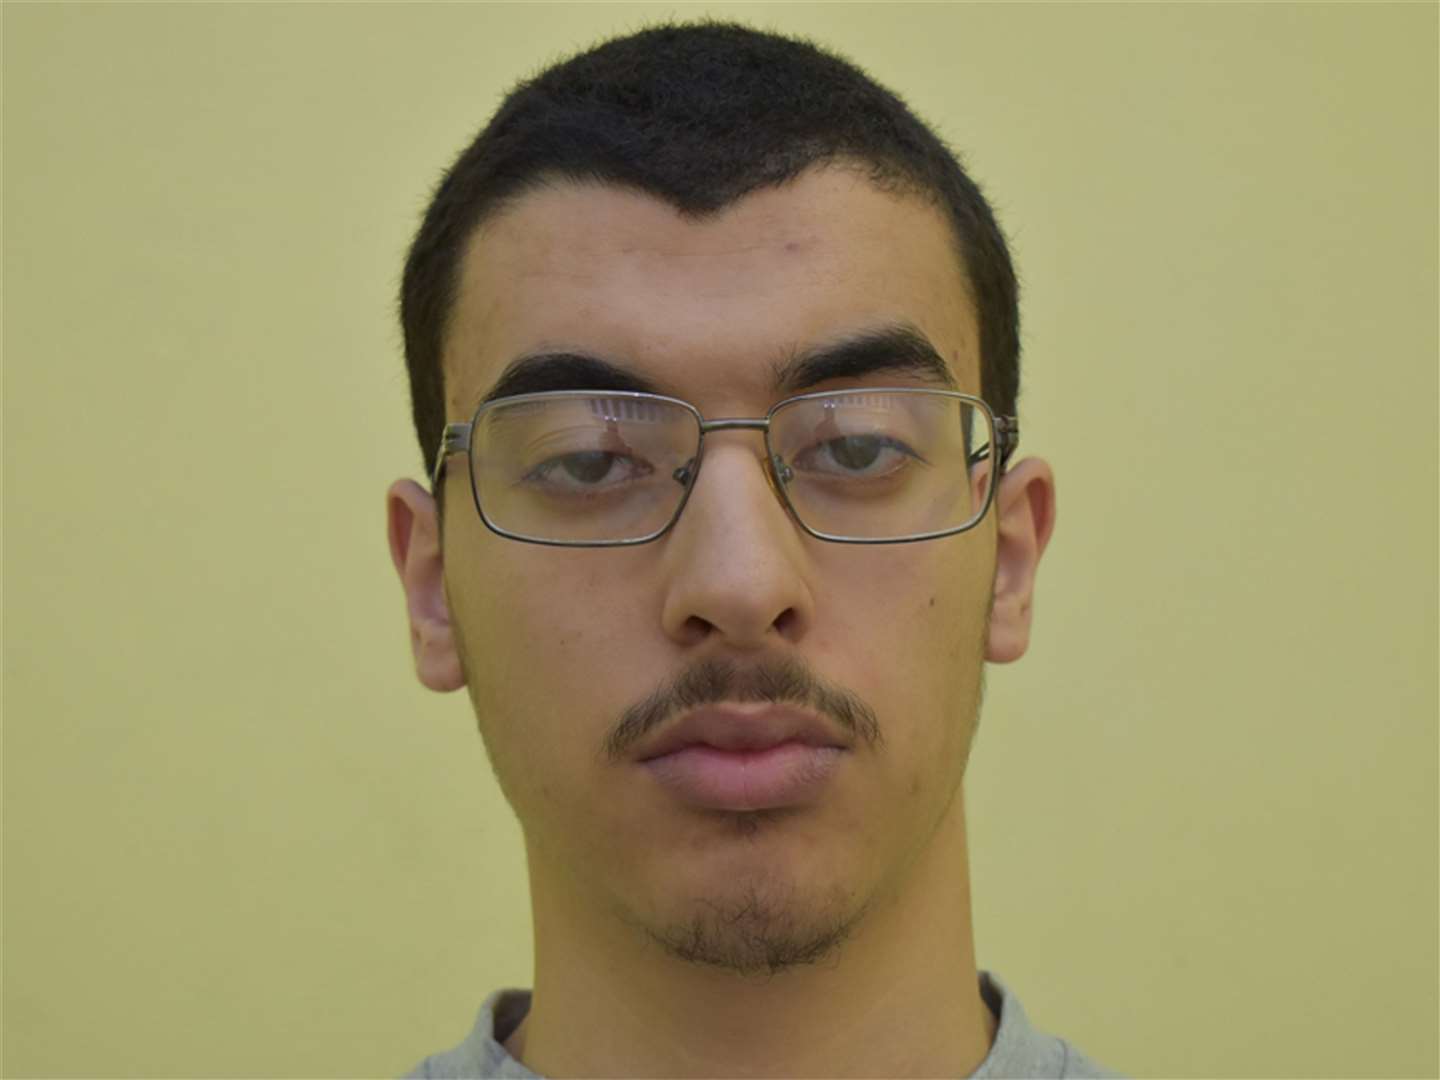 Hashem Abedi, younger brother of Manchester Arena bomber Salman Abedi (Greater Manchester Police/PA)